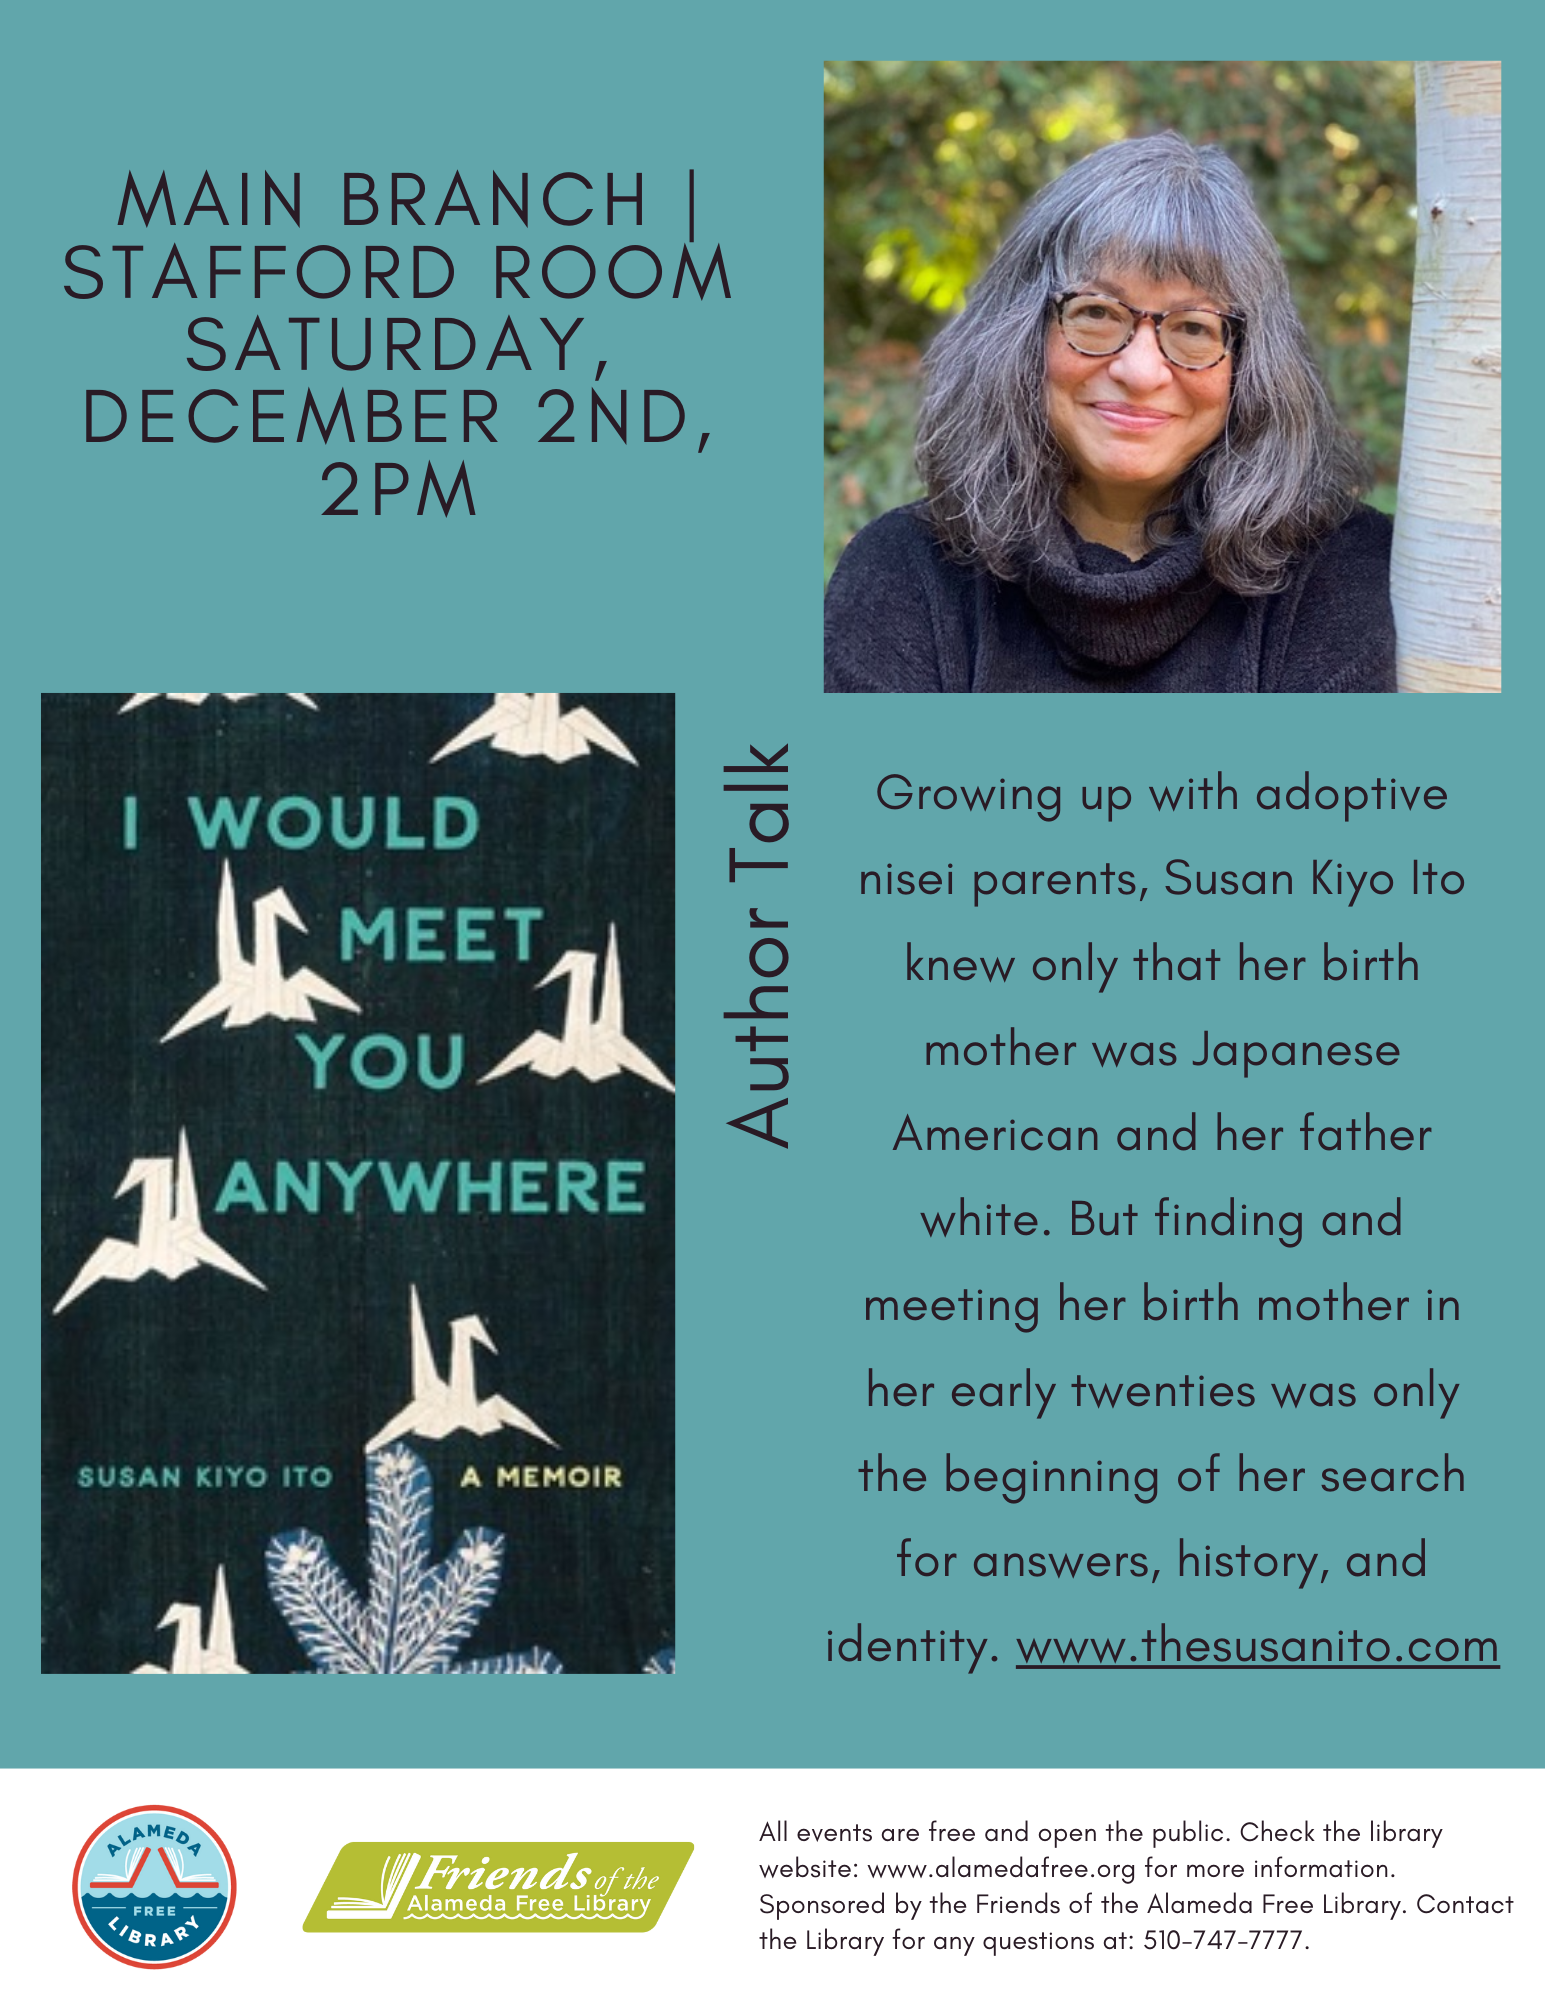 Join us for an author talk with Susan Ito on Saturday Dec 2 at 2pm